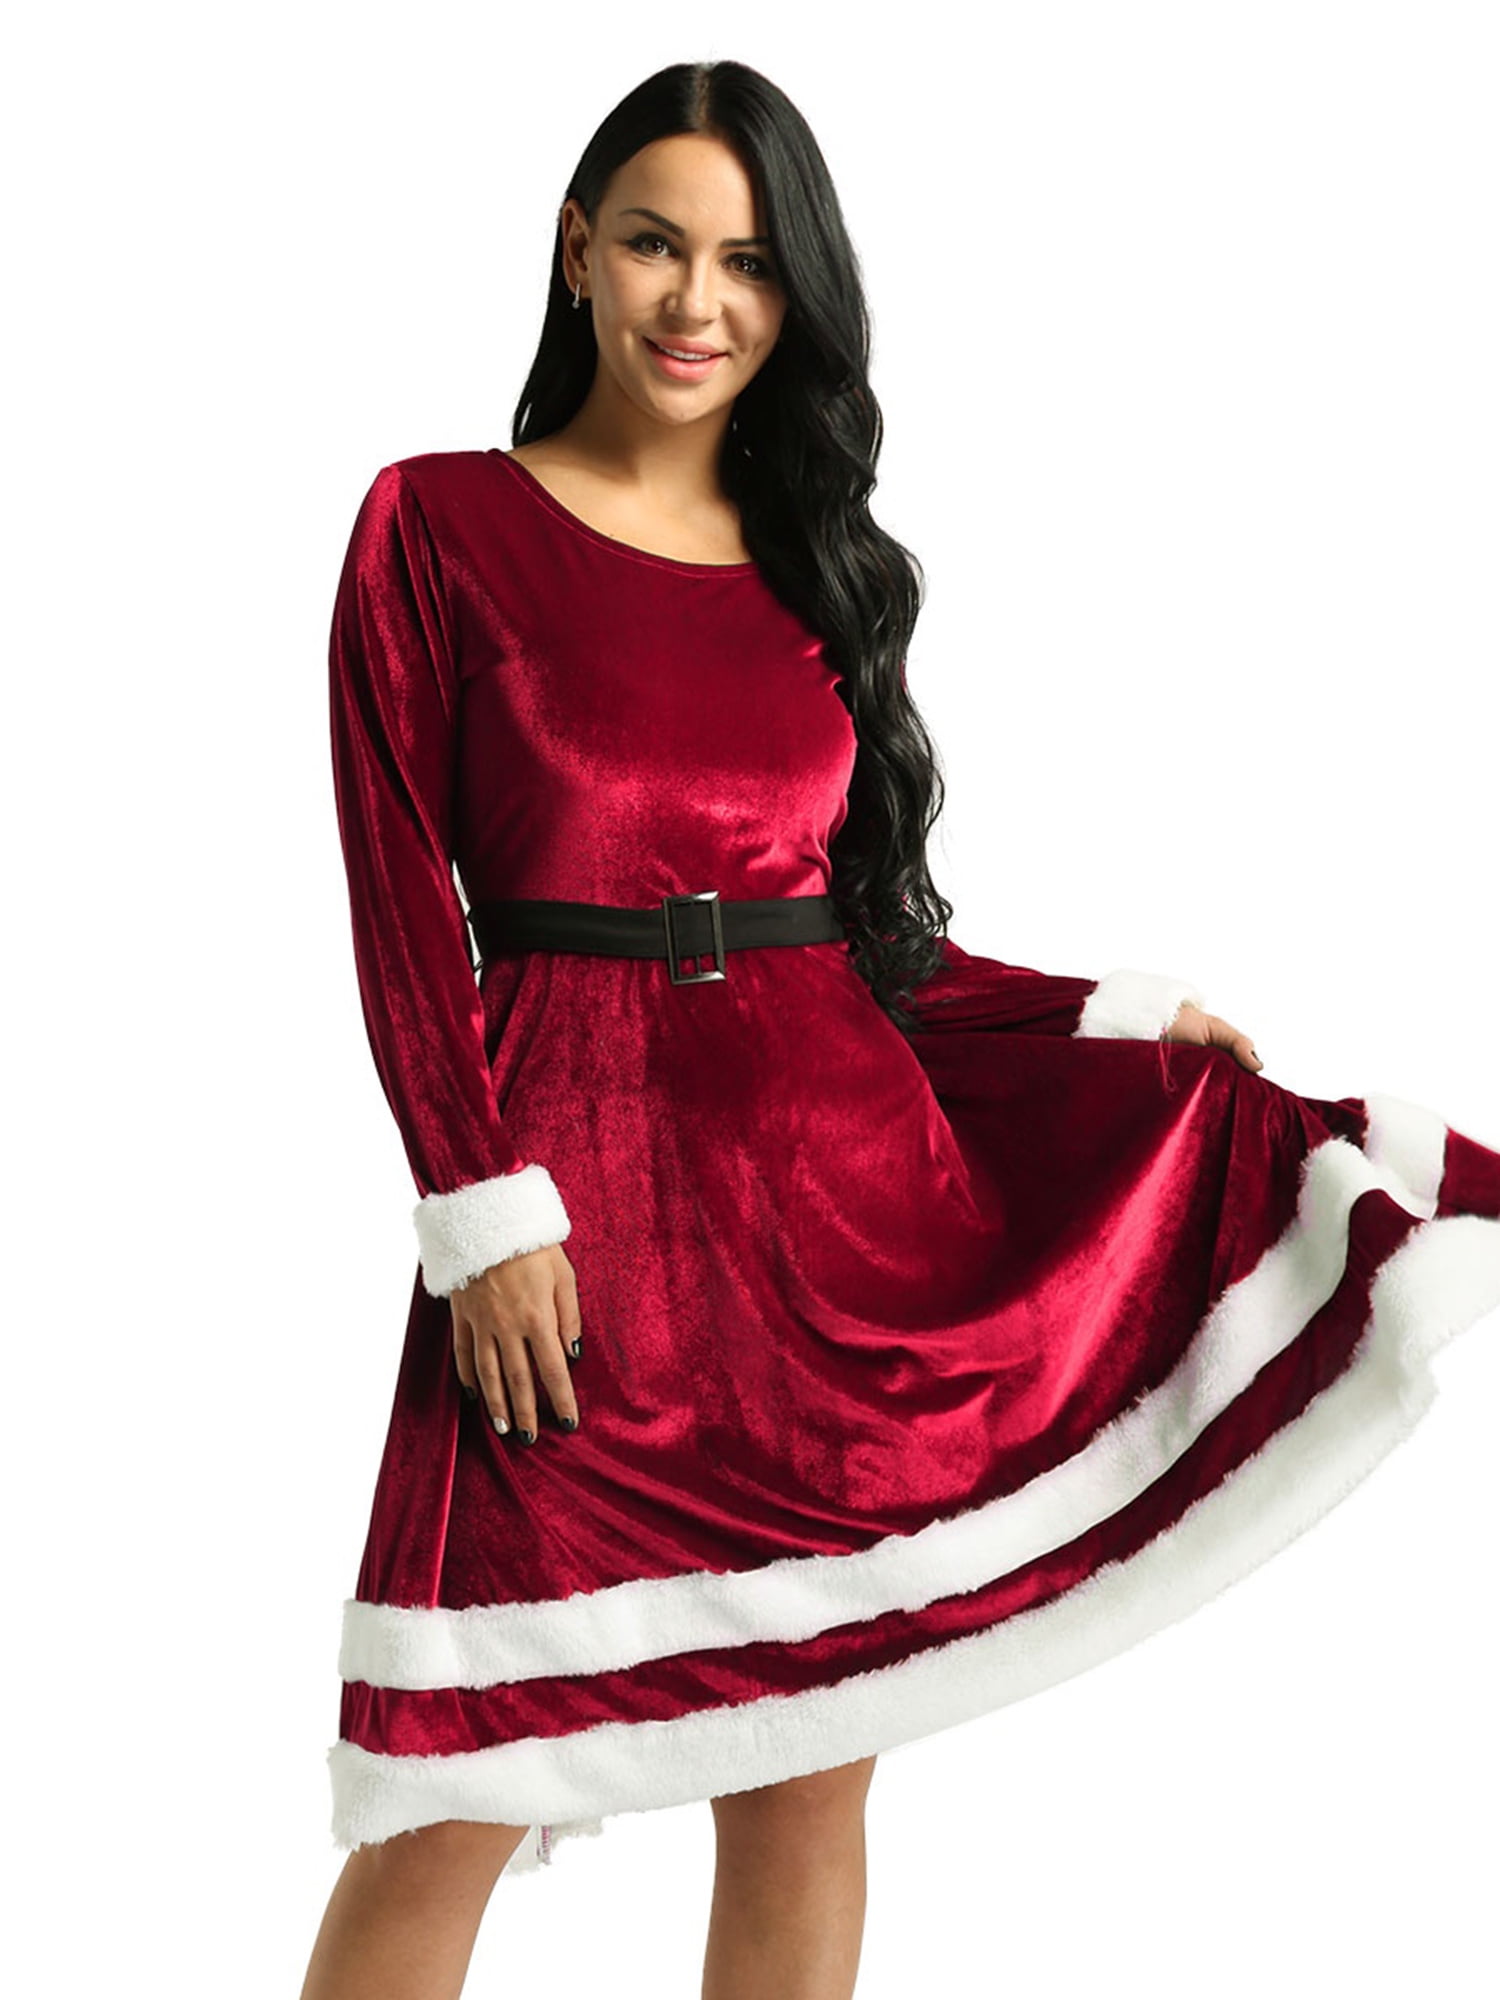 Women's Ladies Long Sleeves Mrs Santa Claus Costume Christmas Fancy Dress Outfit